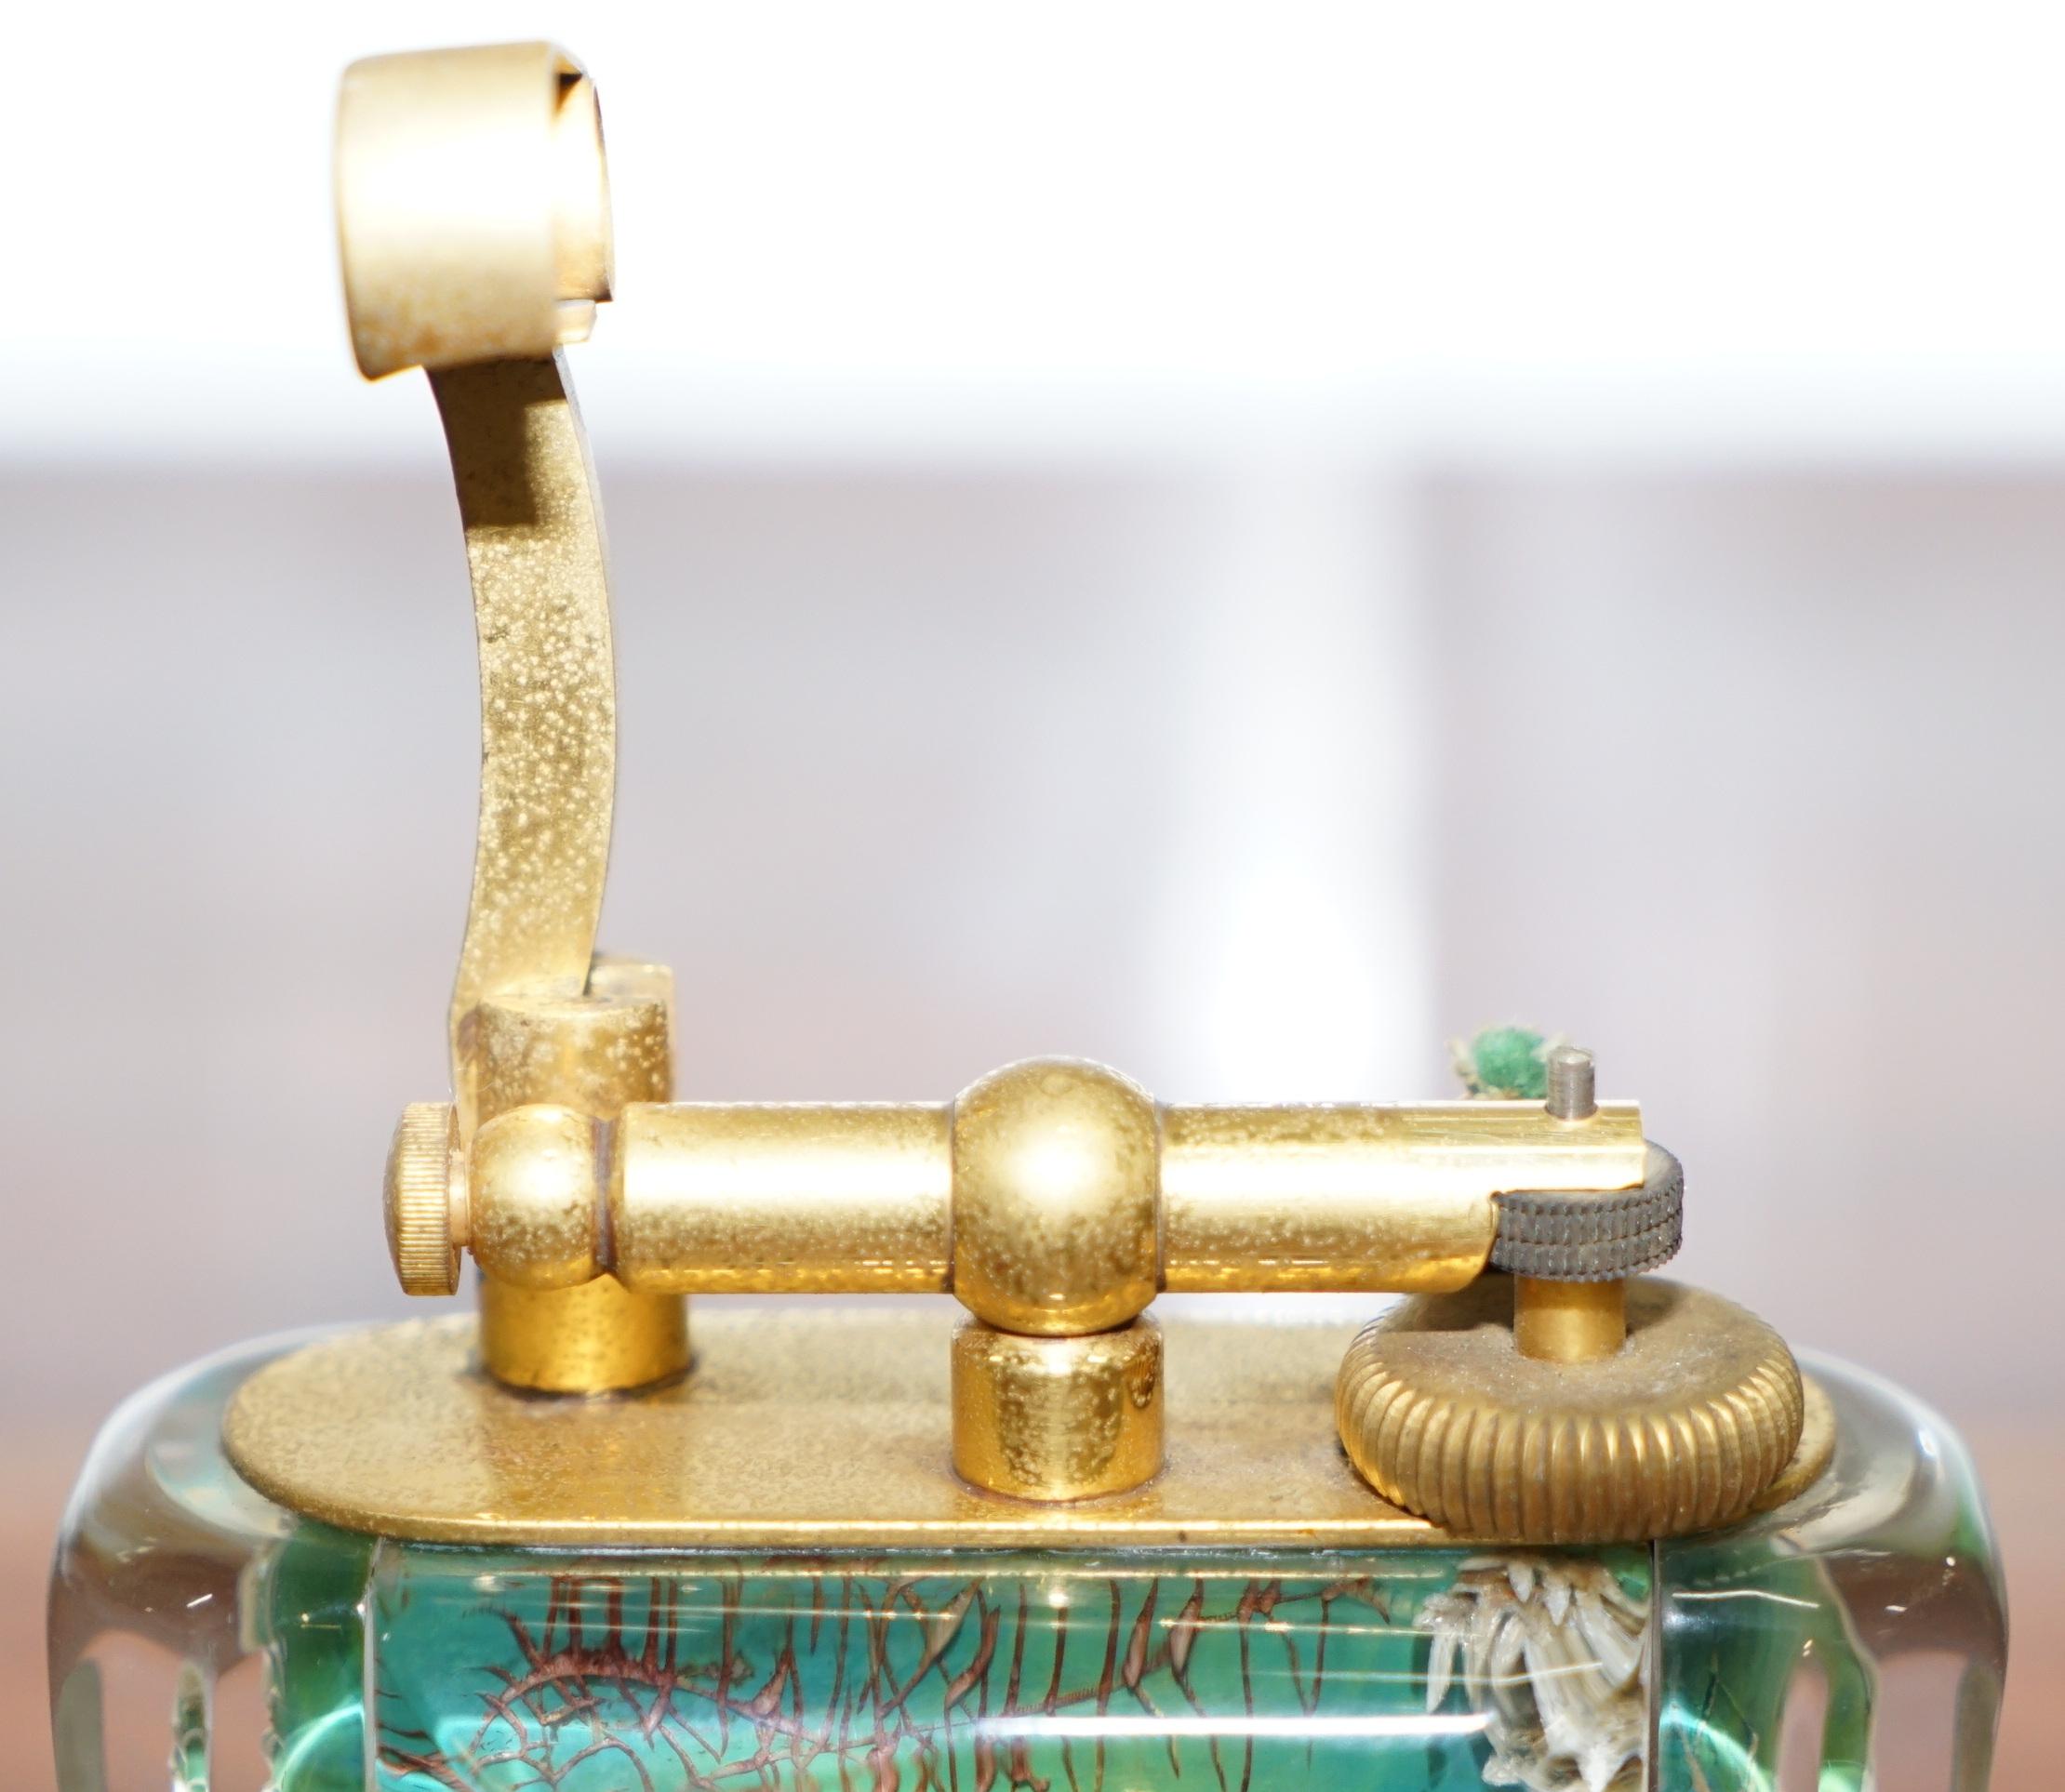 Hand-Crafted Rare Gold-Plated 1950s Dunhill Aquarium Oversized Table Lighter Made in England